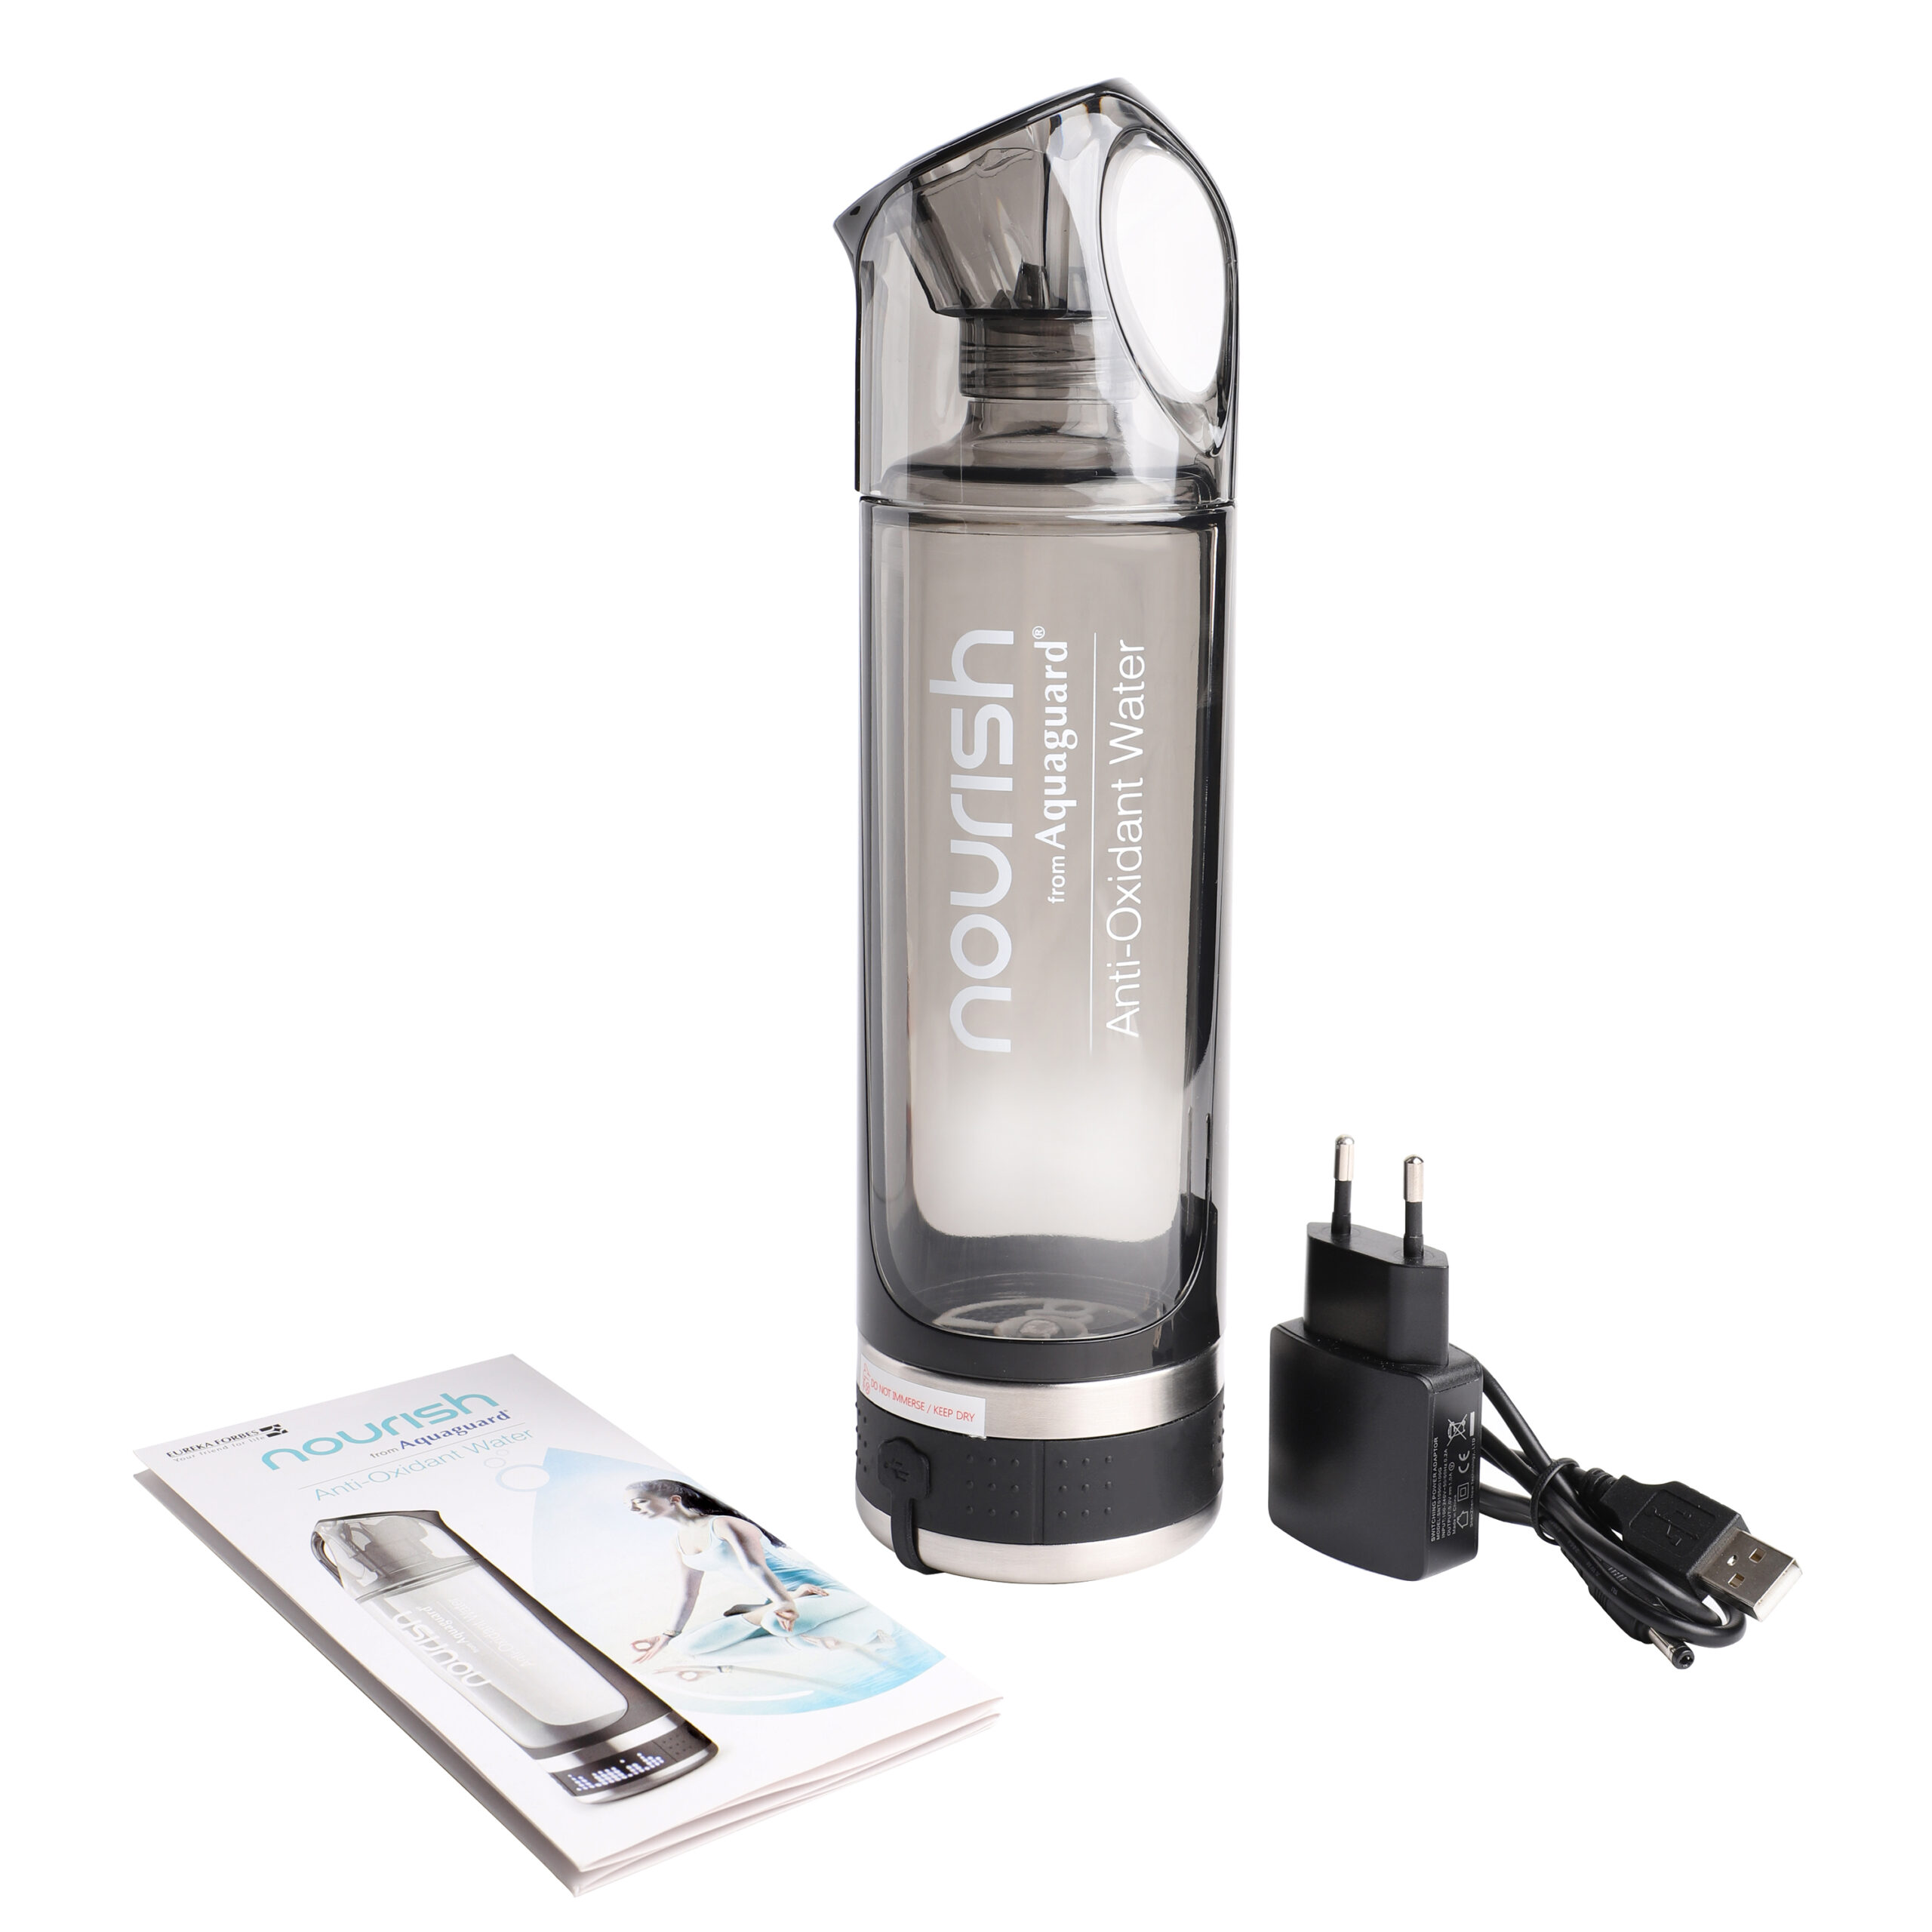 Eureka Forbes introduces nourished drinking water on the go